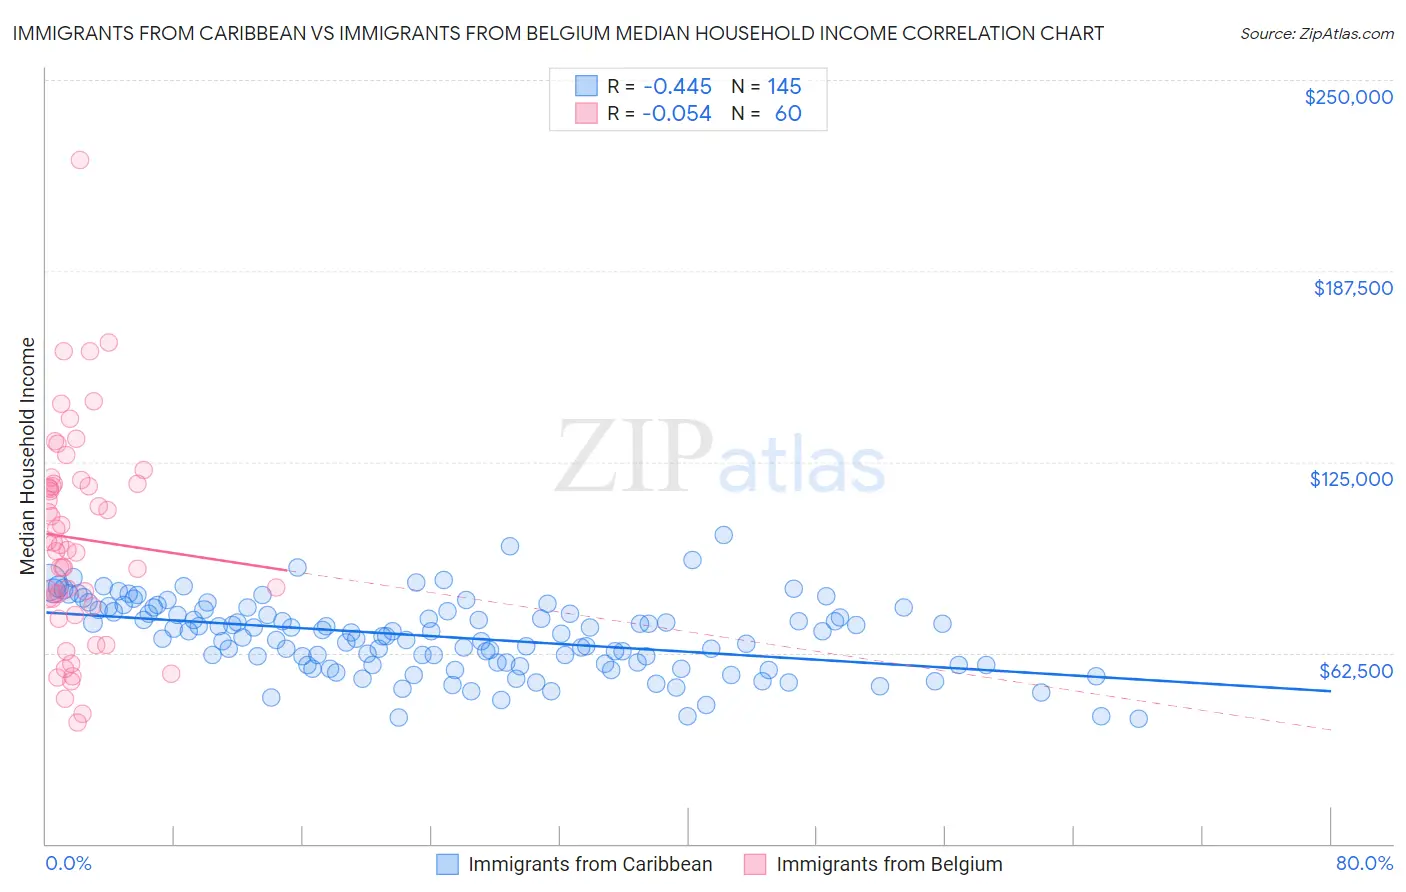 Immigrants from Caribbean vs Immigrants from Belgium Median Household Income